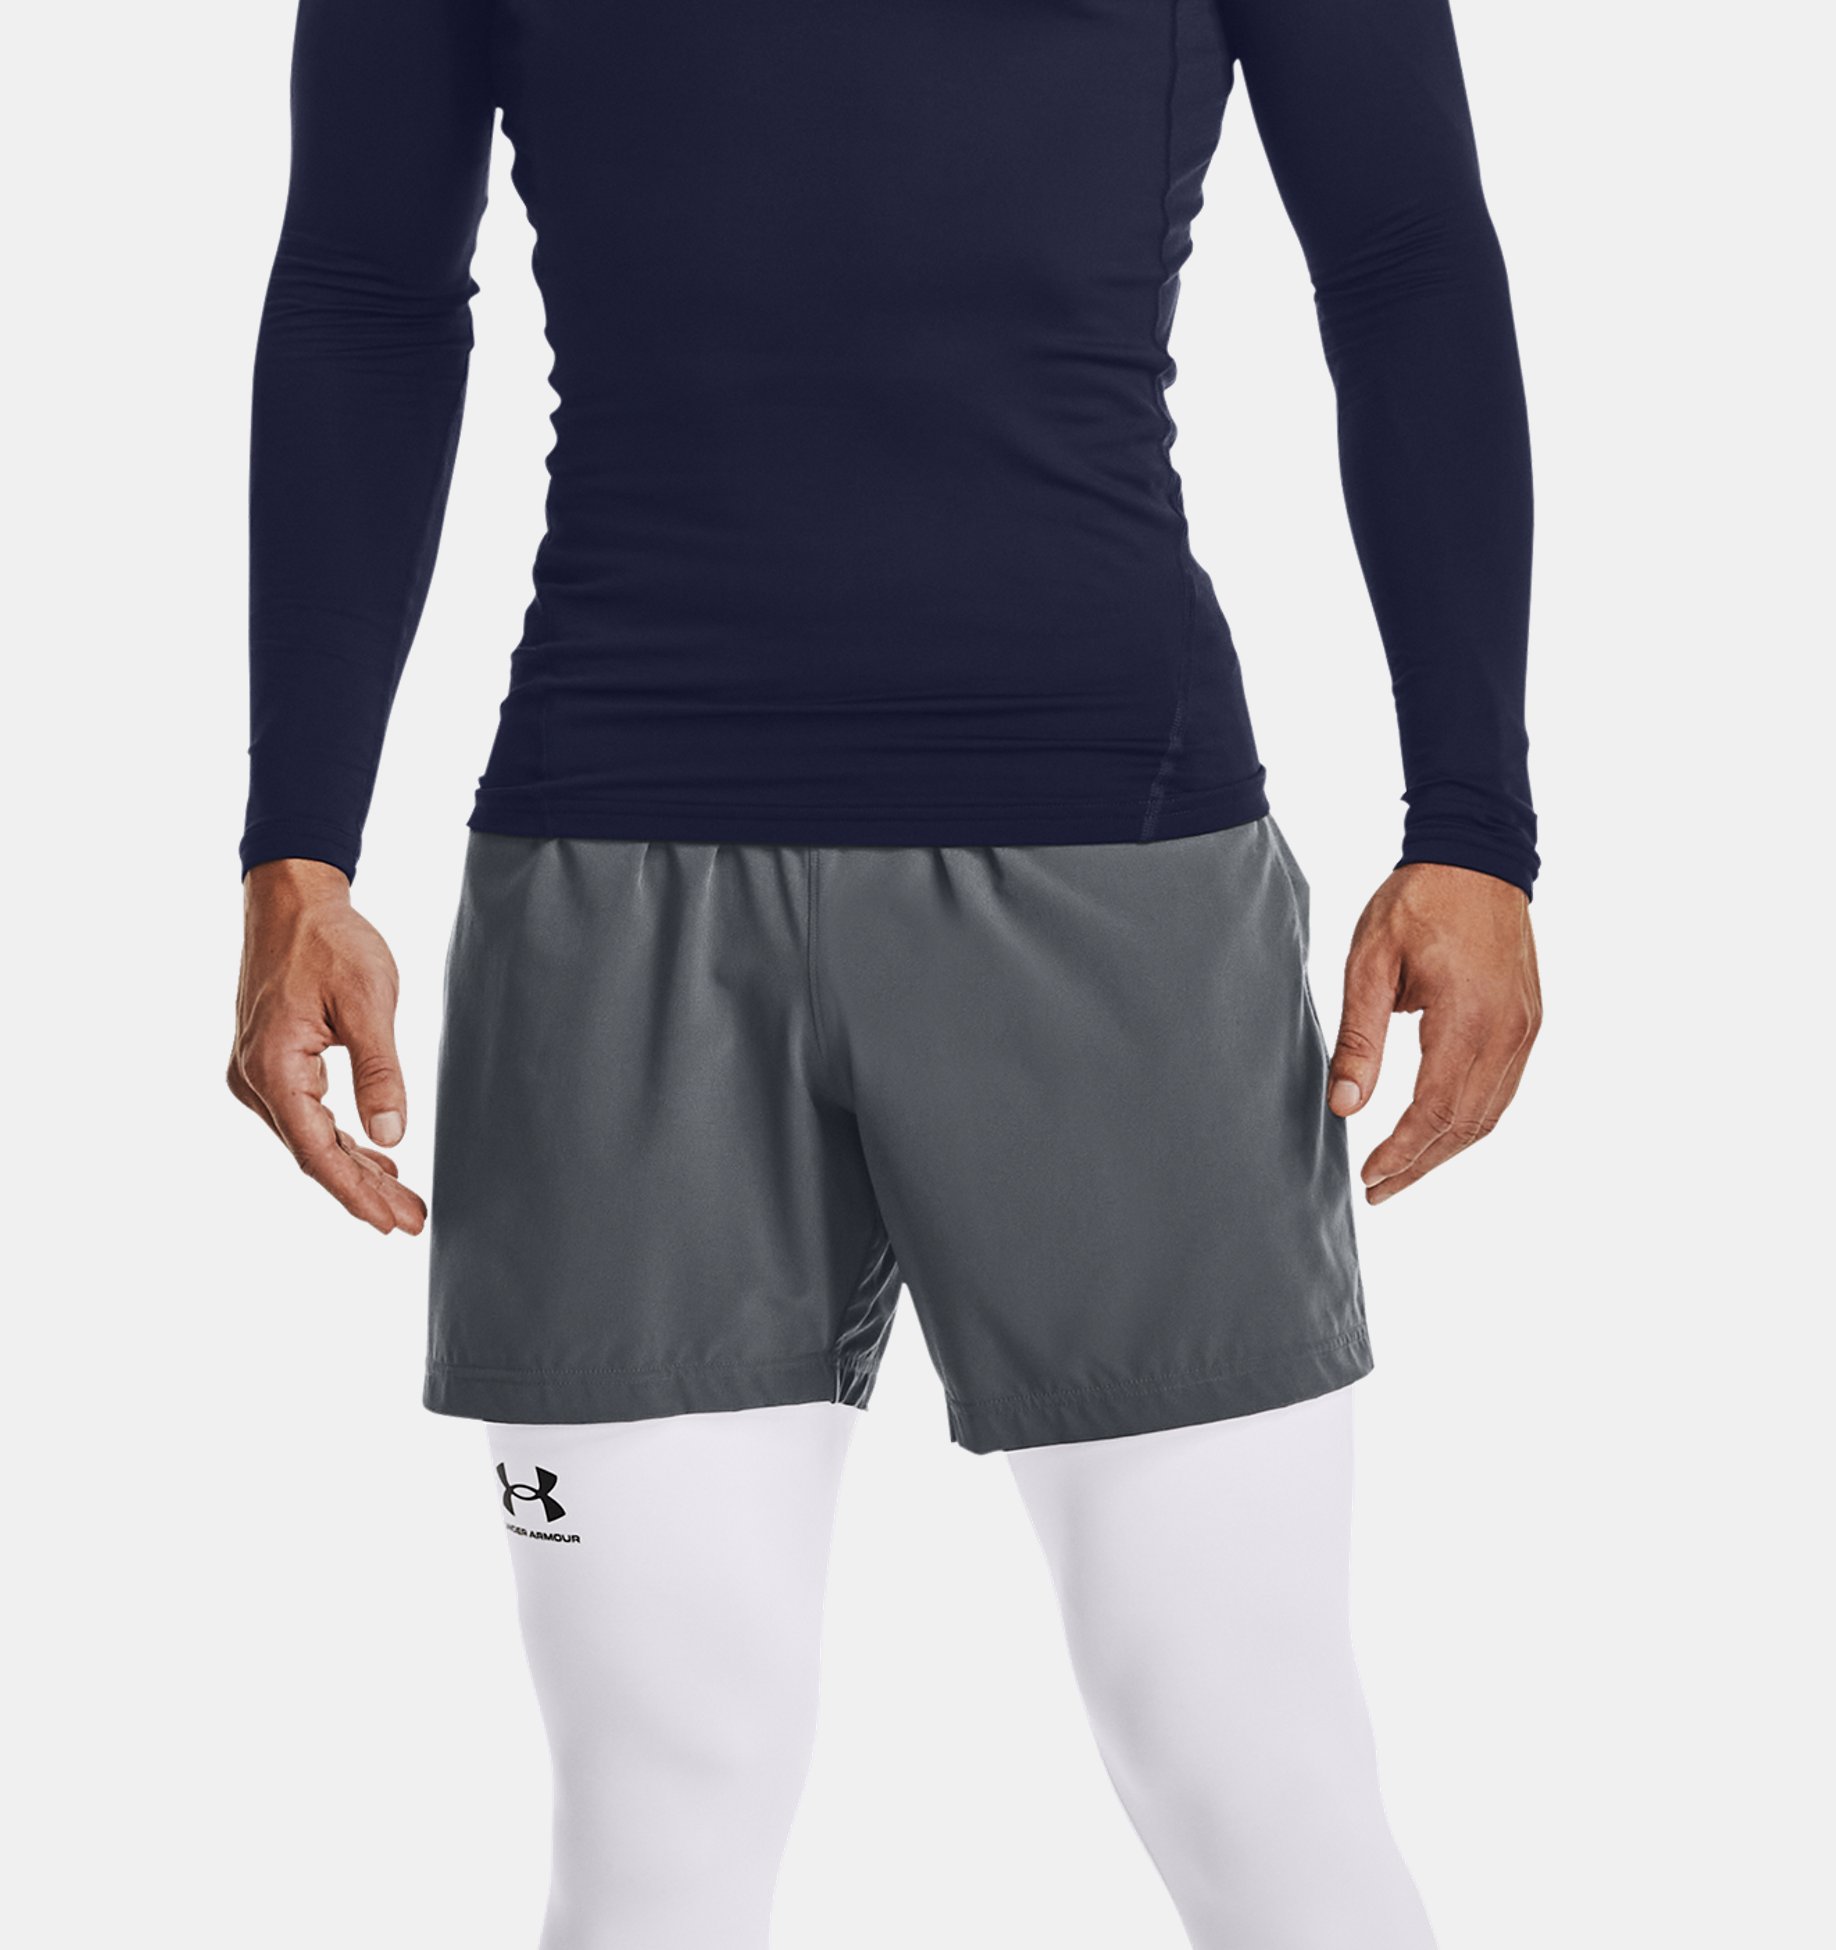 Under Armour UA Evo ColdGear Fitted Mock White 1210354-100 - Free